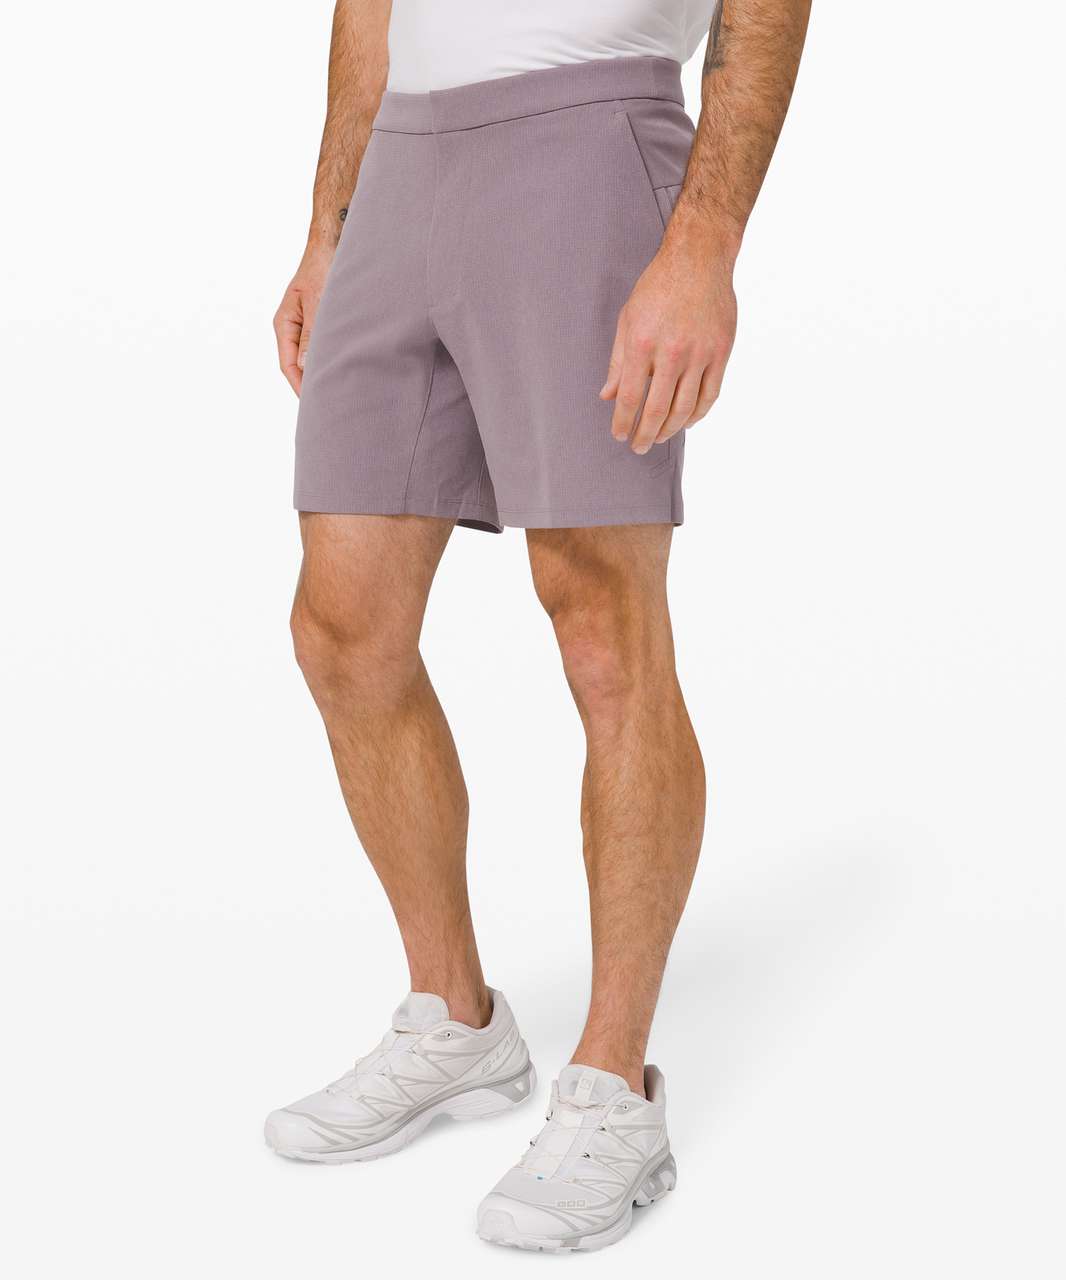 lululemon Shorts Guide: Find Your Style For Every Occasion This Summer -  BroBible